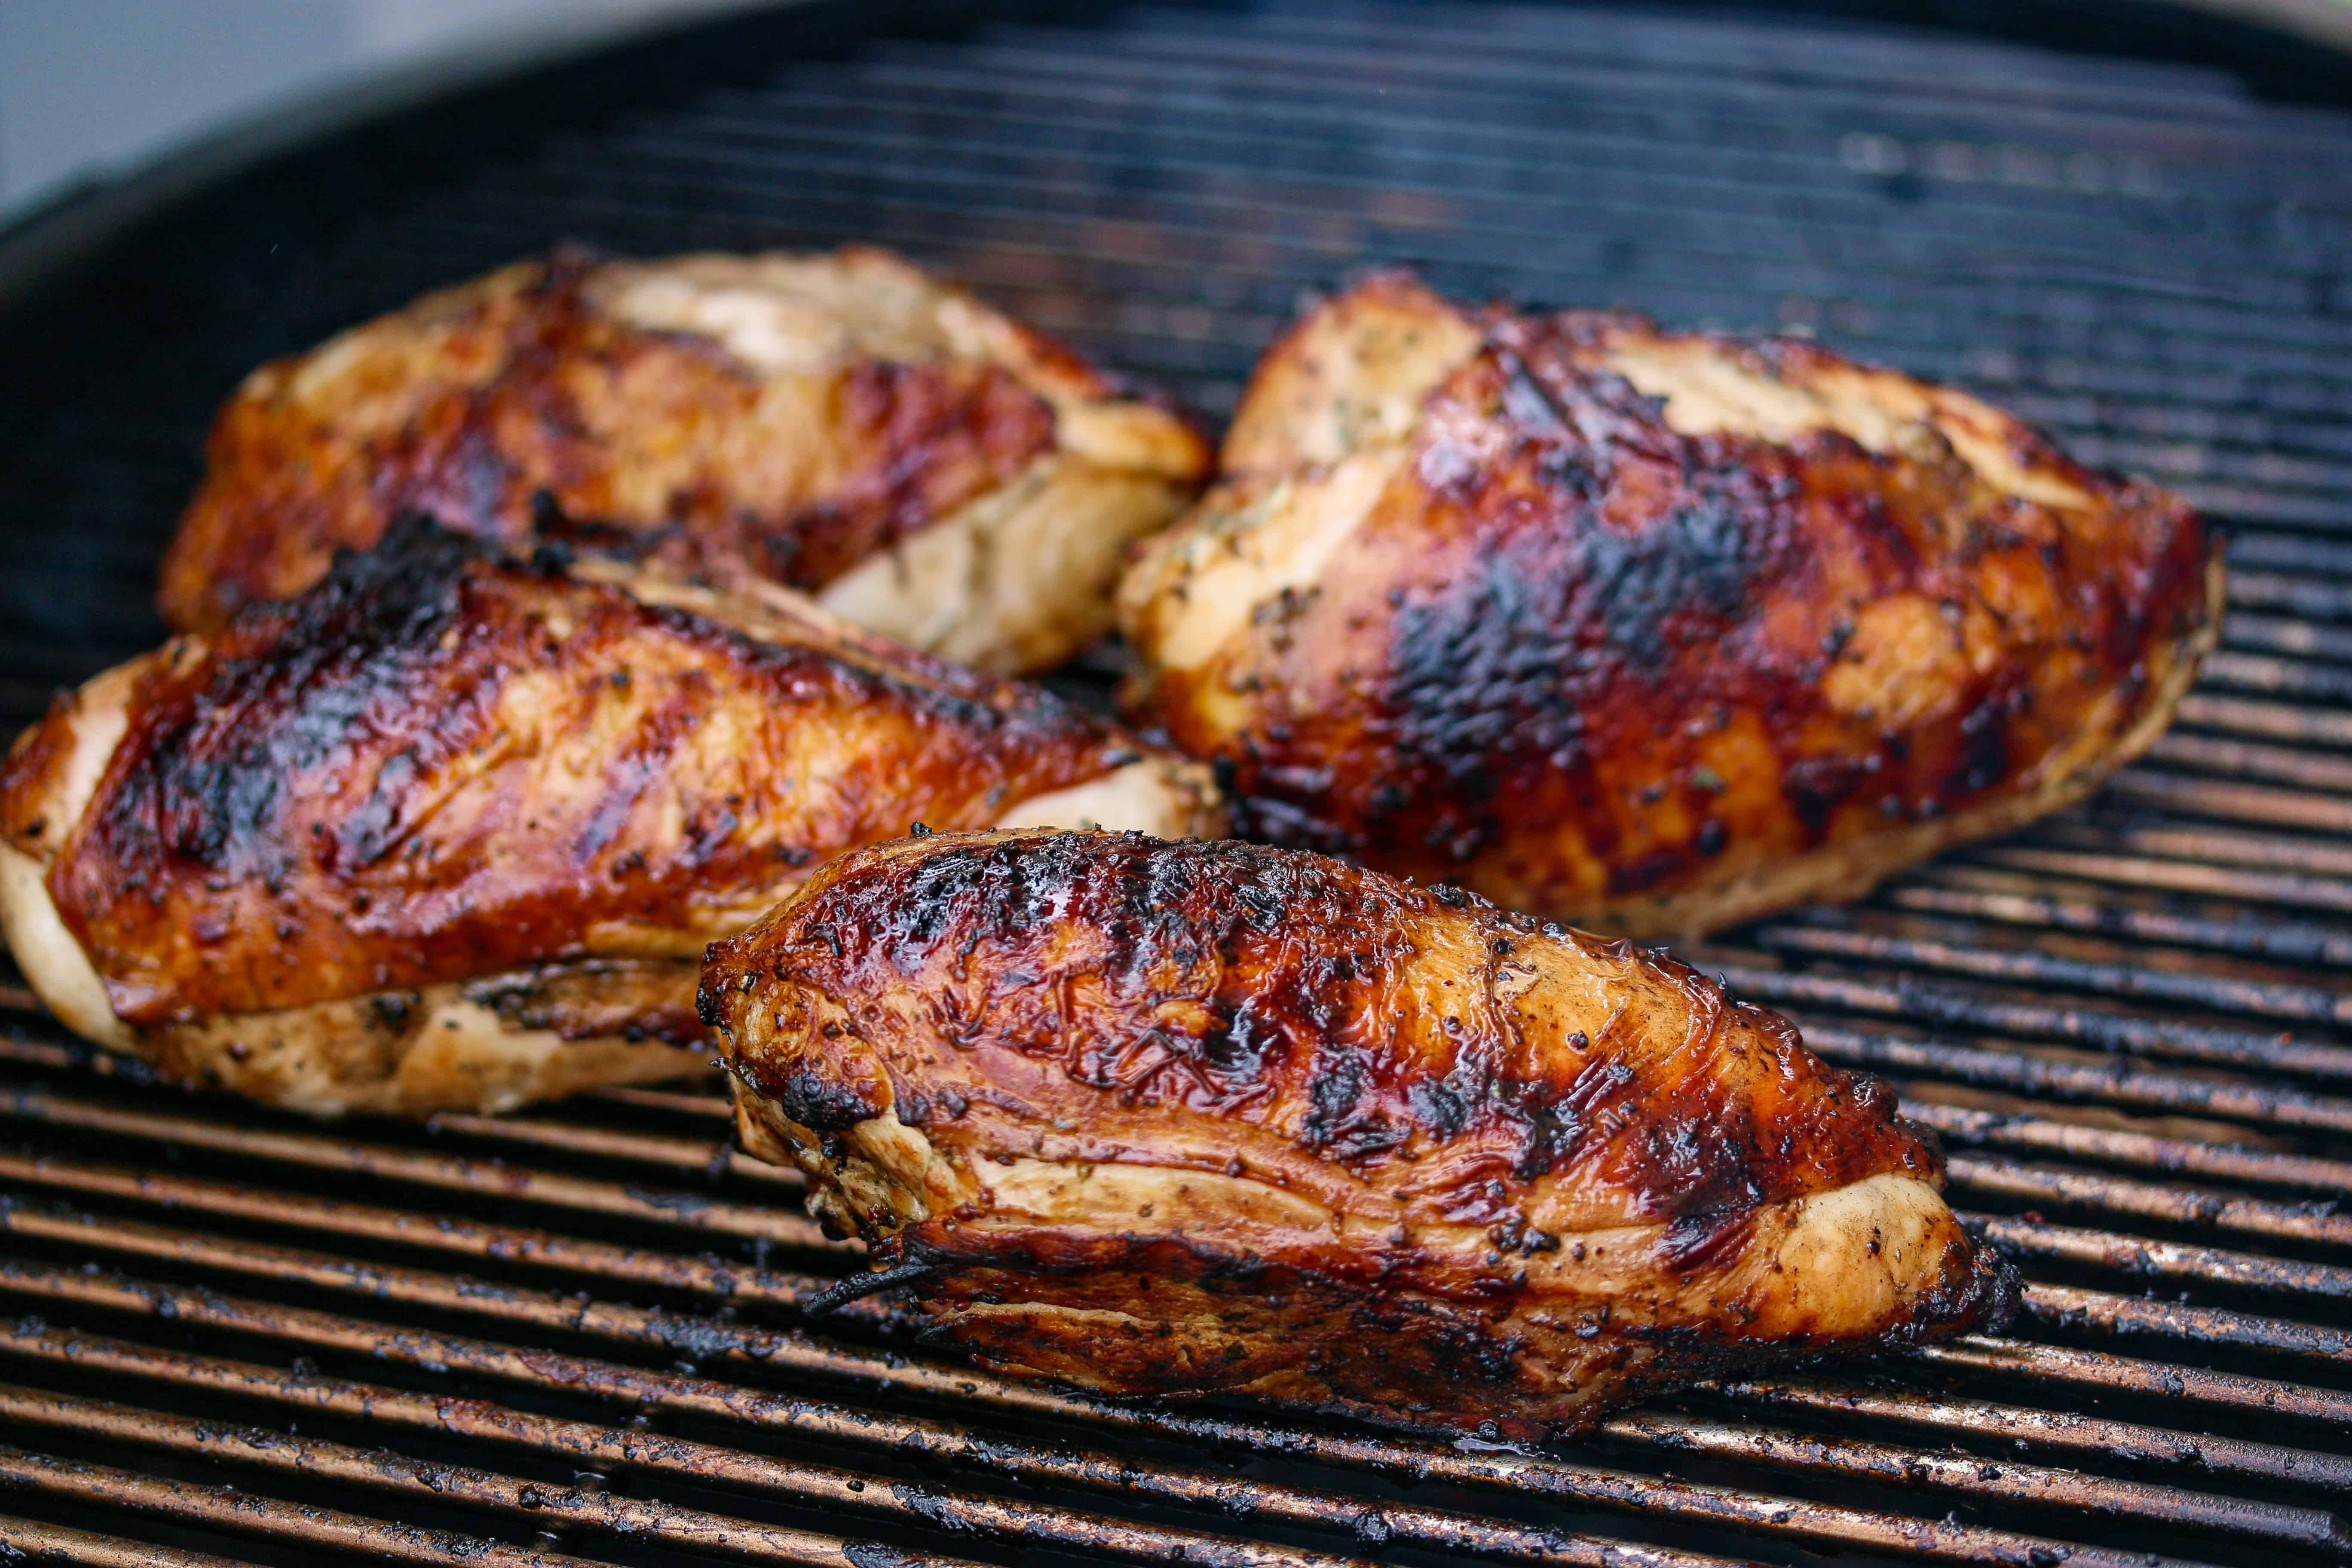 Step-by-step guide to Grilling Chicken Breasts on a charcoal grill